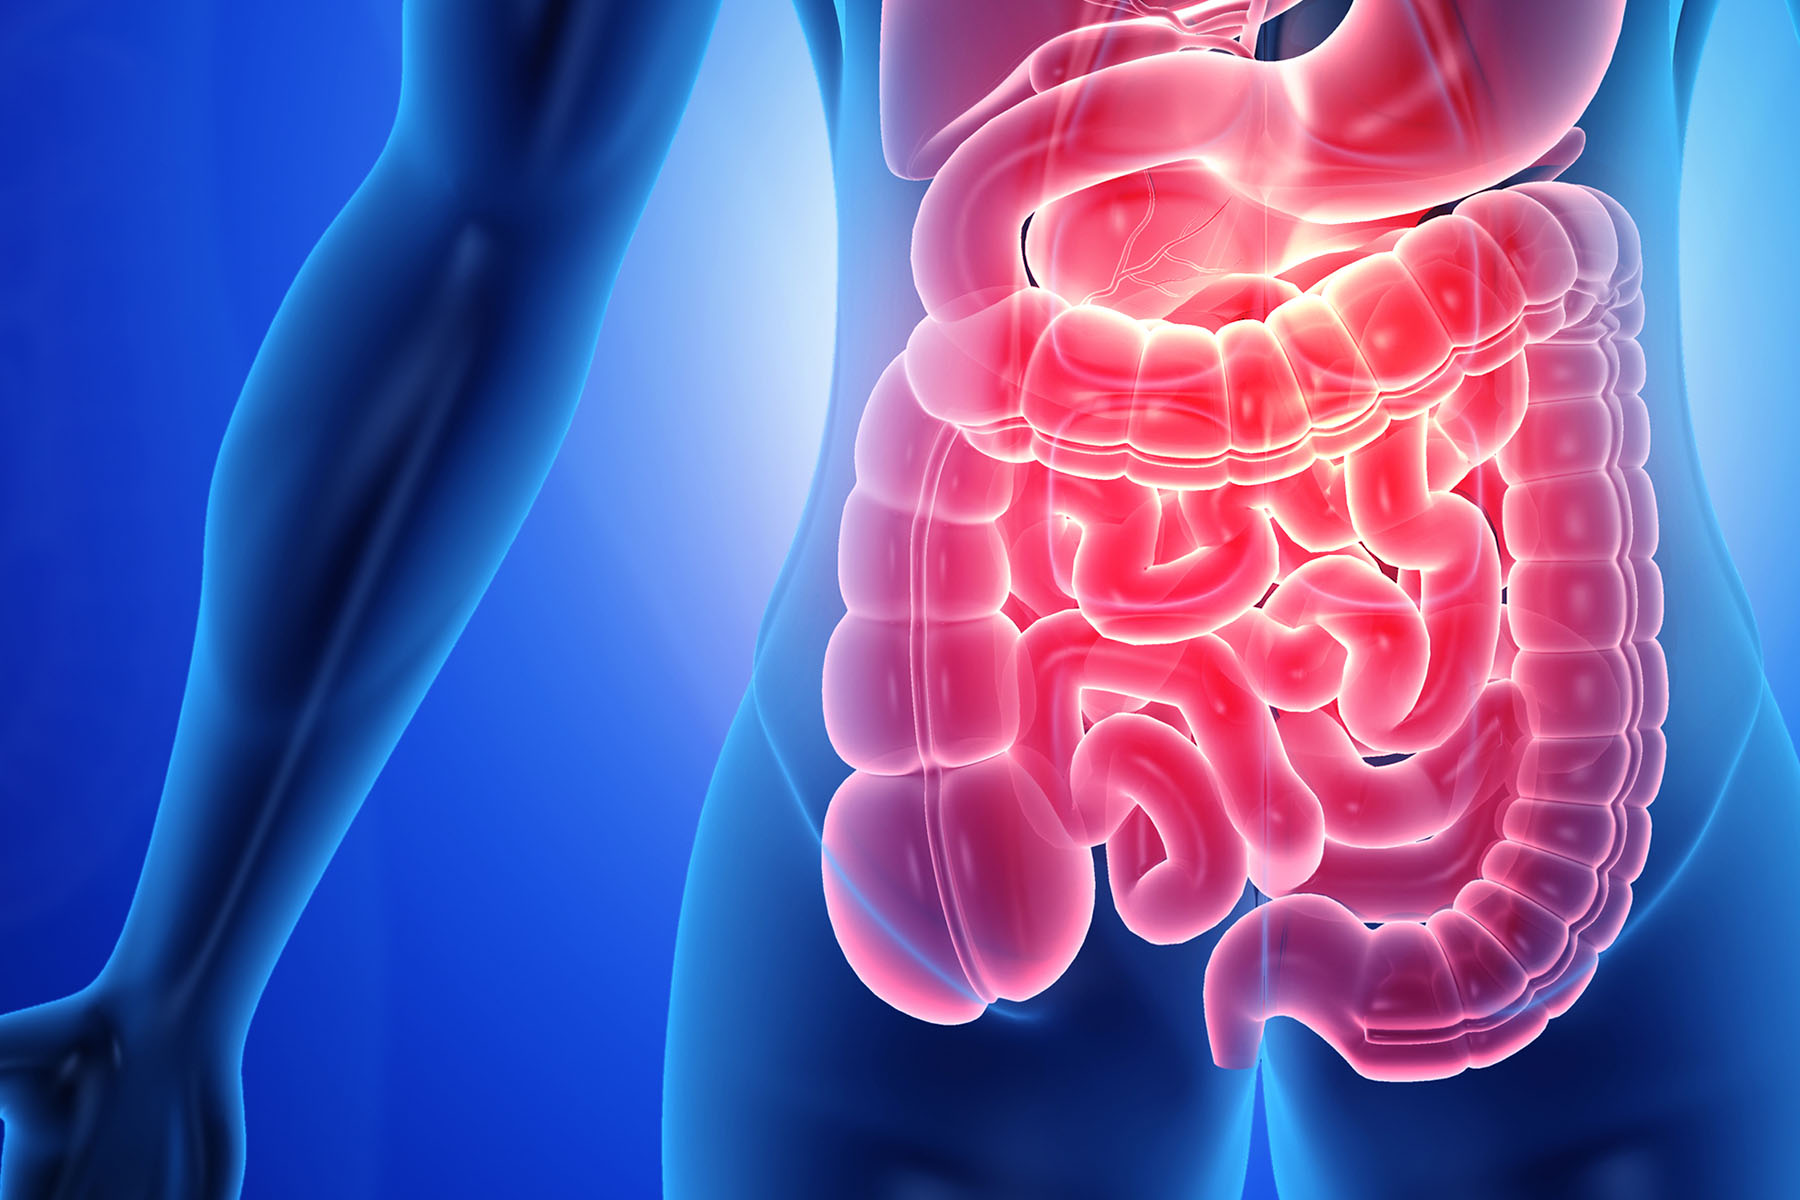 Precision medicine tool finds hidden genetic connections that could personalise IBD treatment